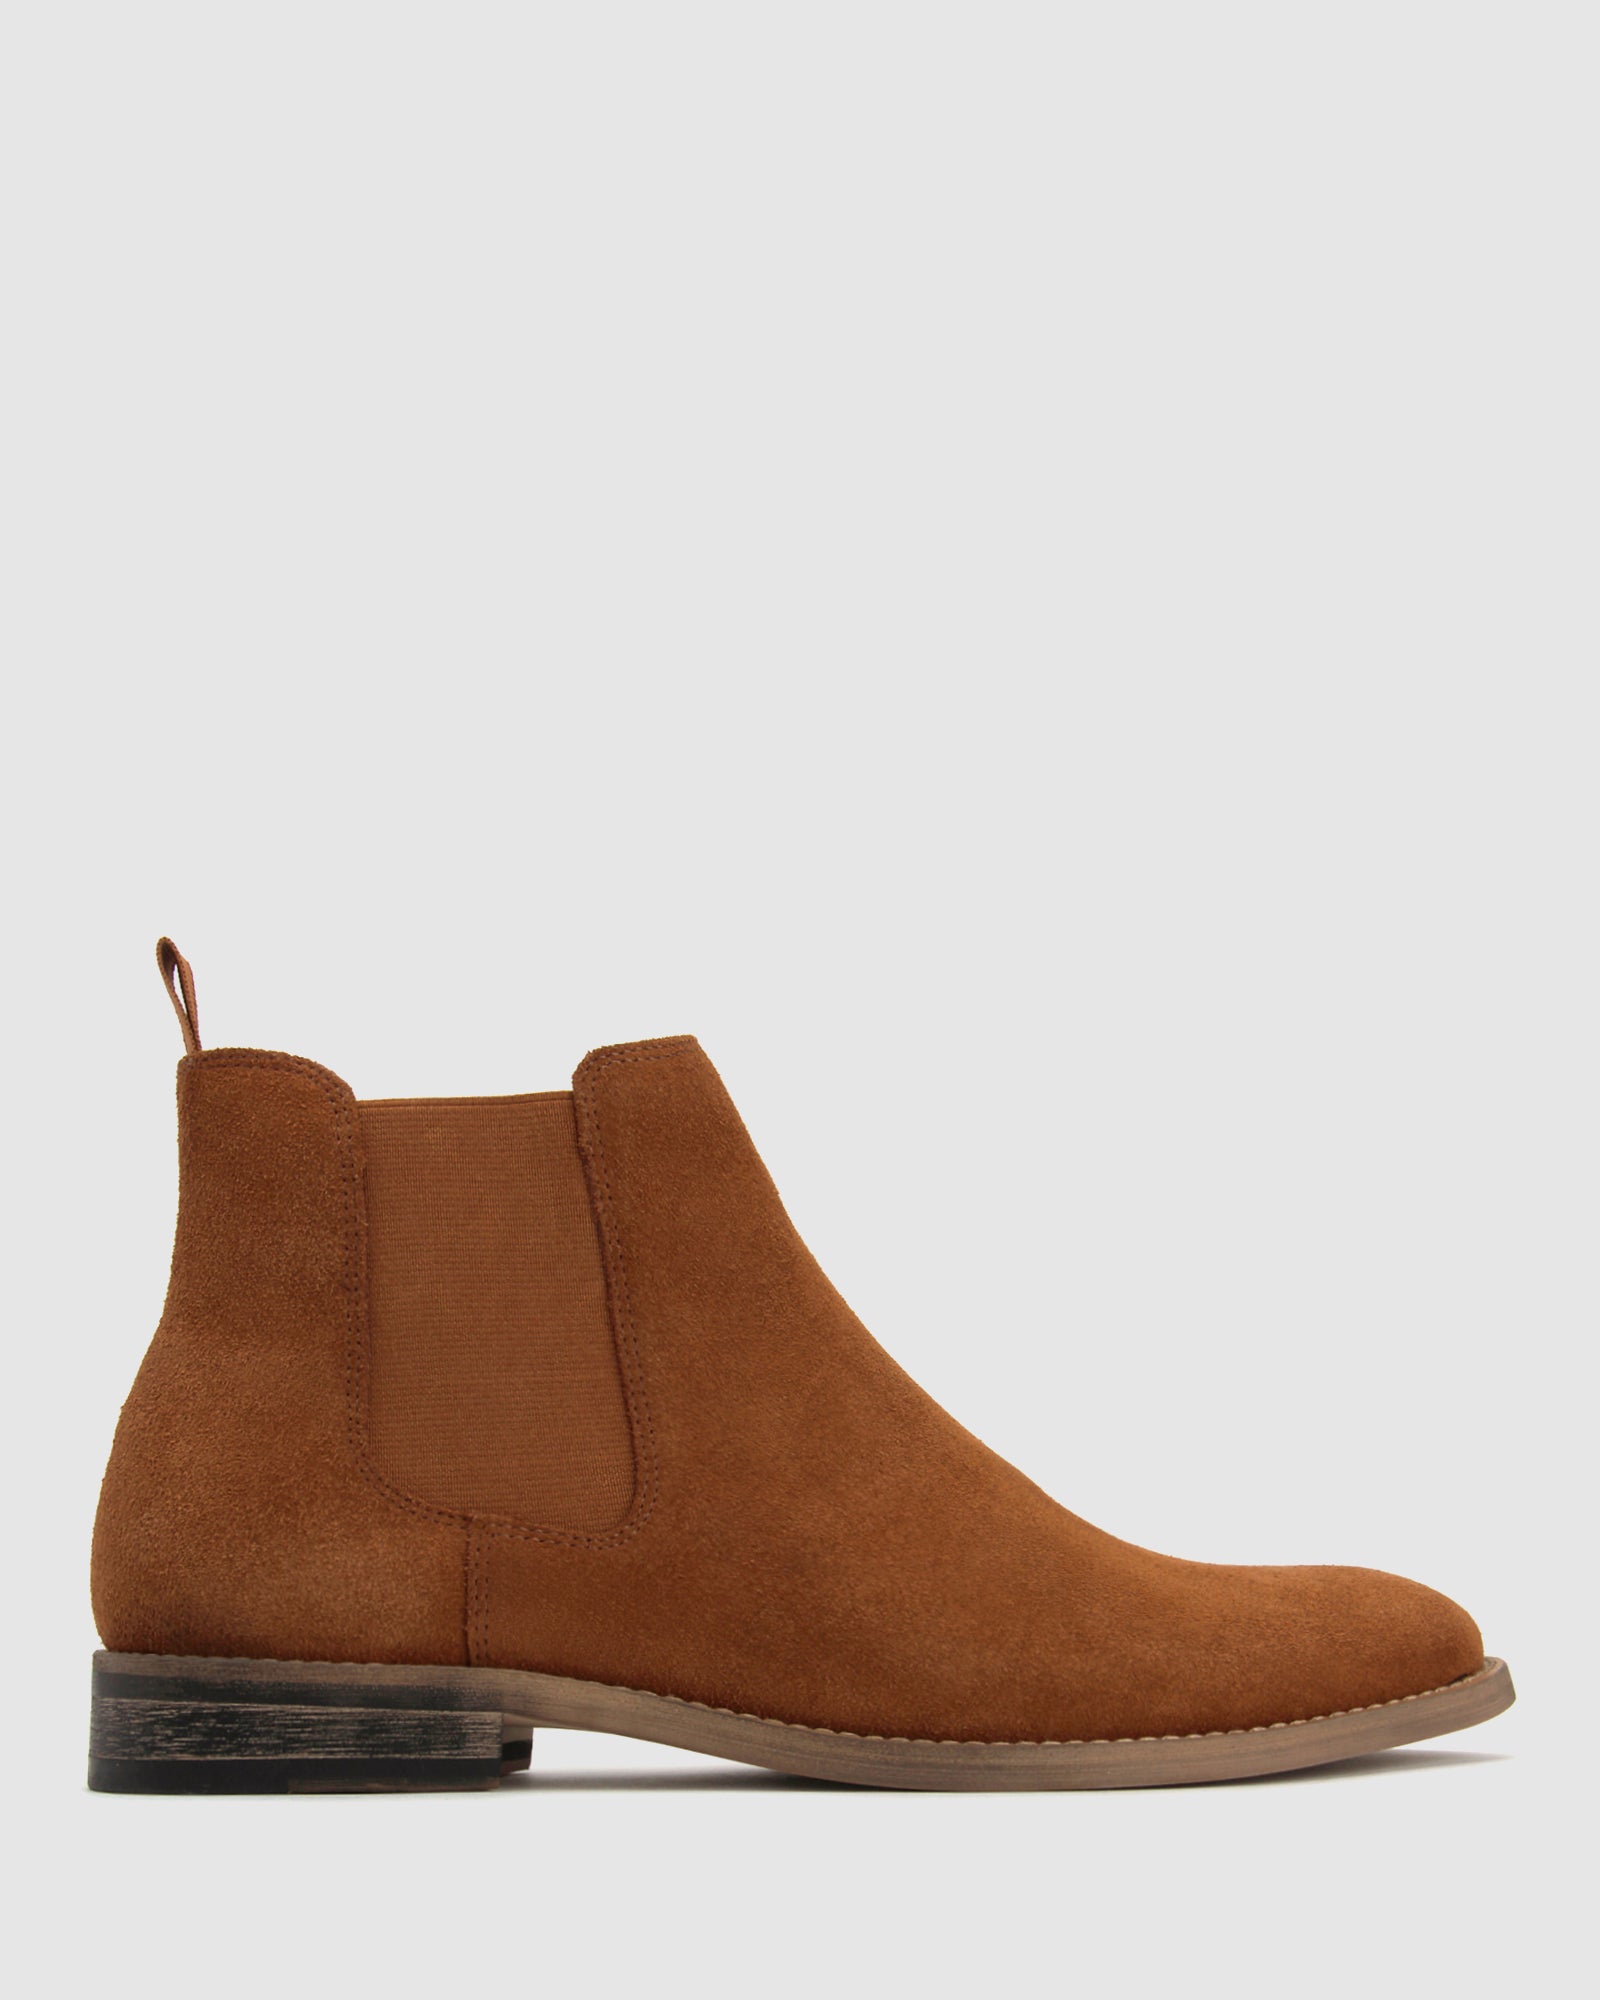 Buy PATROL Suede Chelsea Boots by Betts online - Betts